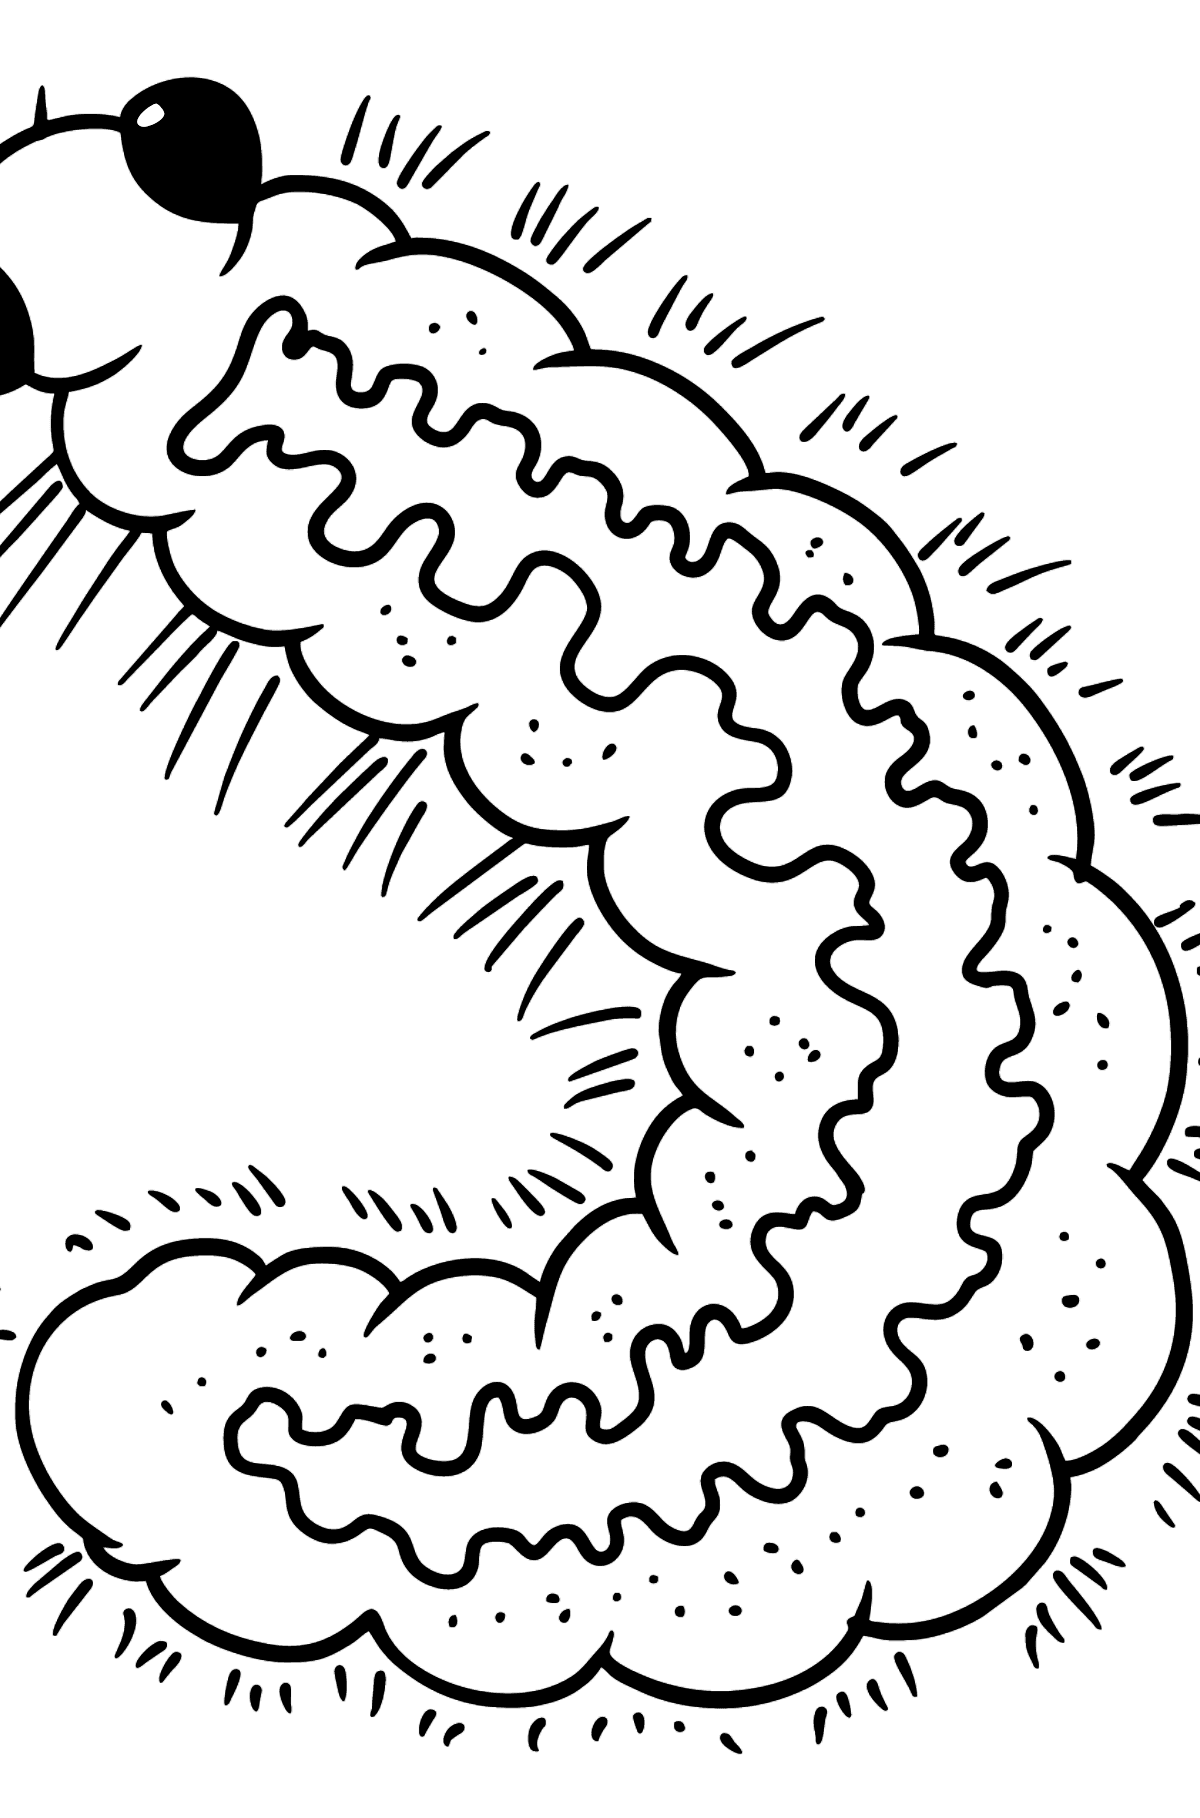 Caterpillar coloring page - Coloring Pages for Kids